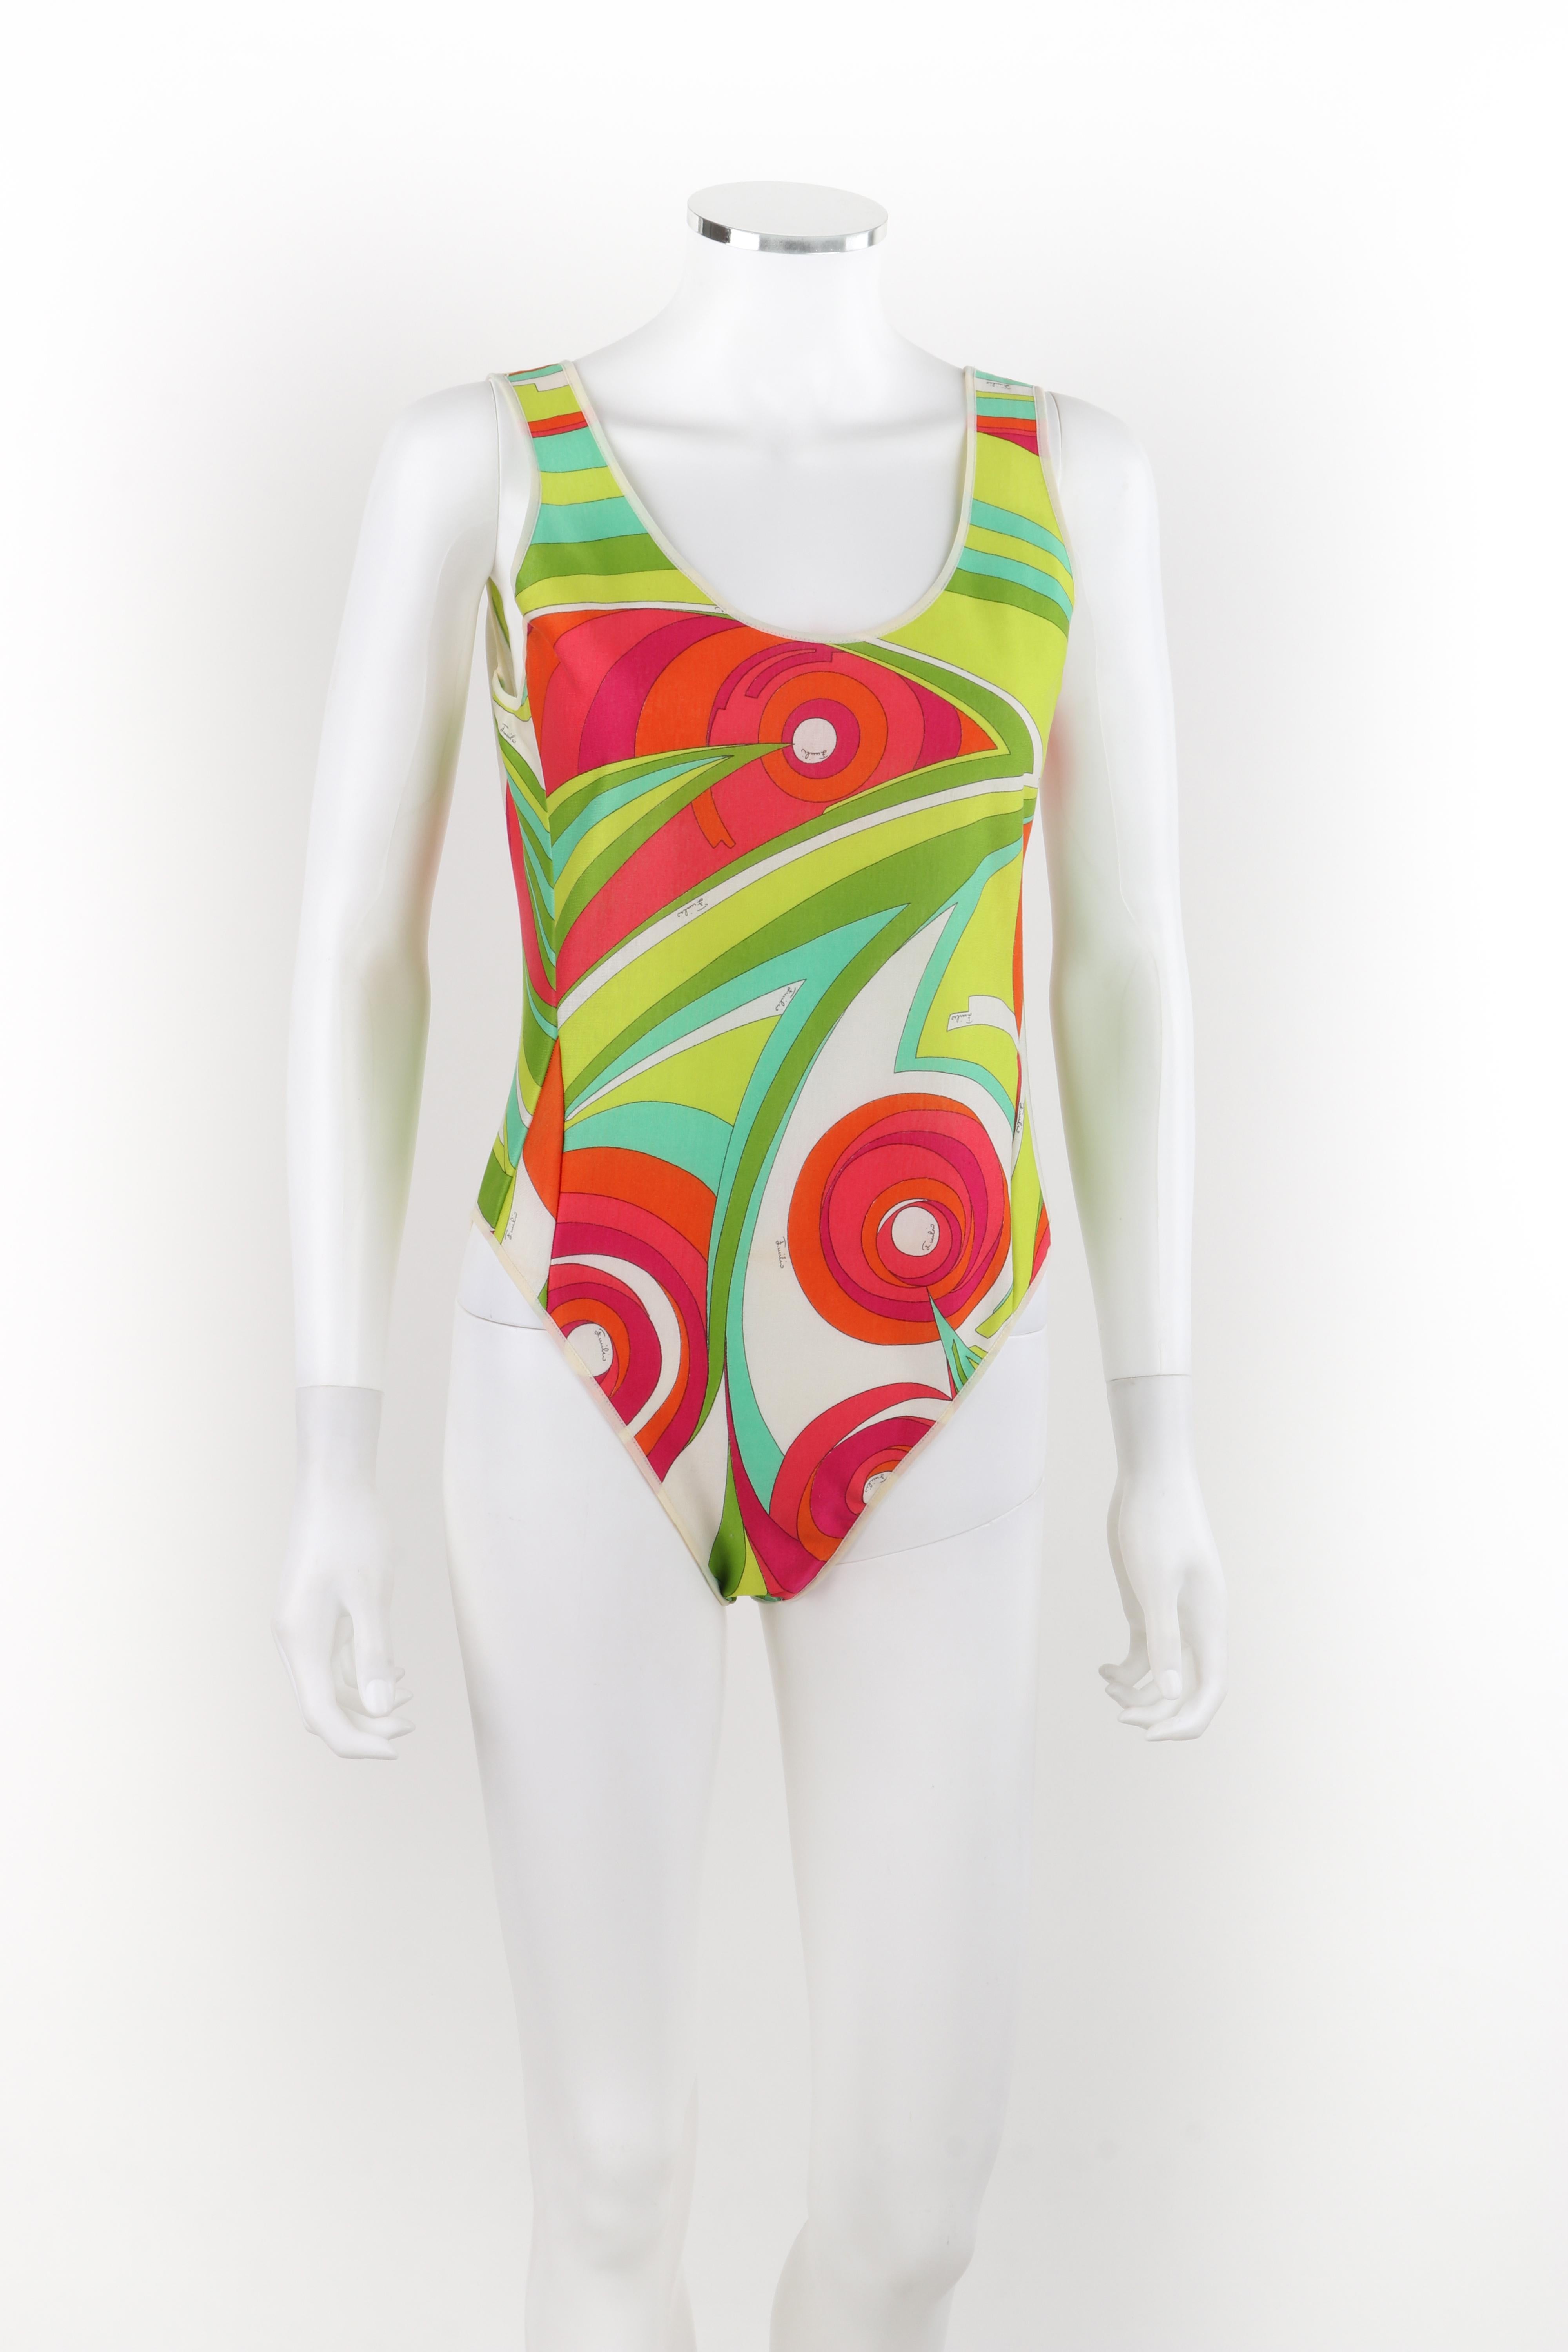 70s style one piece swimsuit